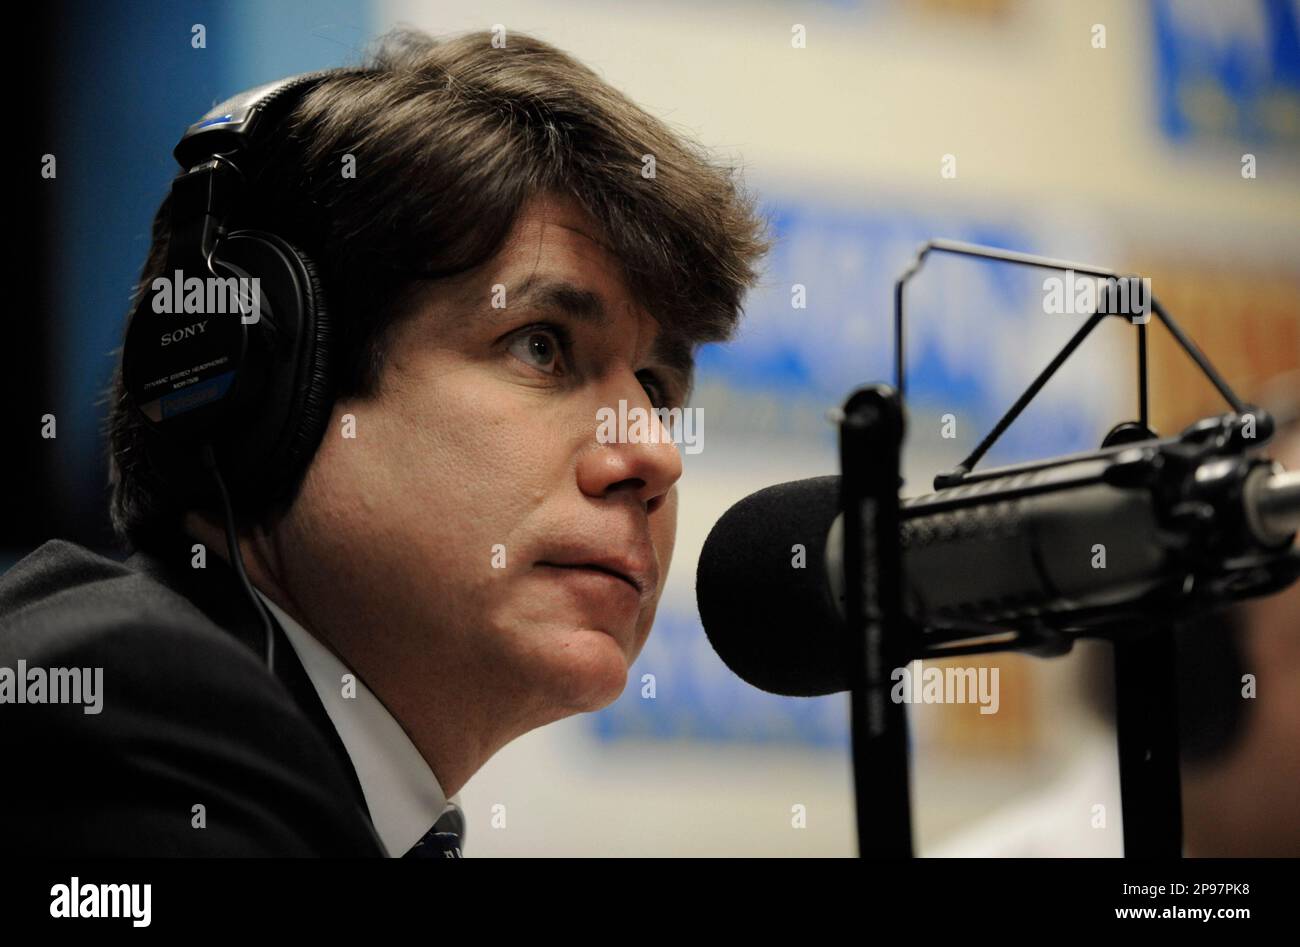 Illinois Gov. Rod Blagojevich talks with a caller while on the air with  radio talk show host Cliff Kelly at WVON radio station in Chicago, Friday,  Jan. 23, 2009. (AP Photo/Paul Beaty